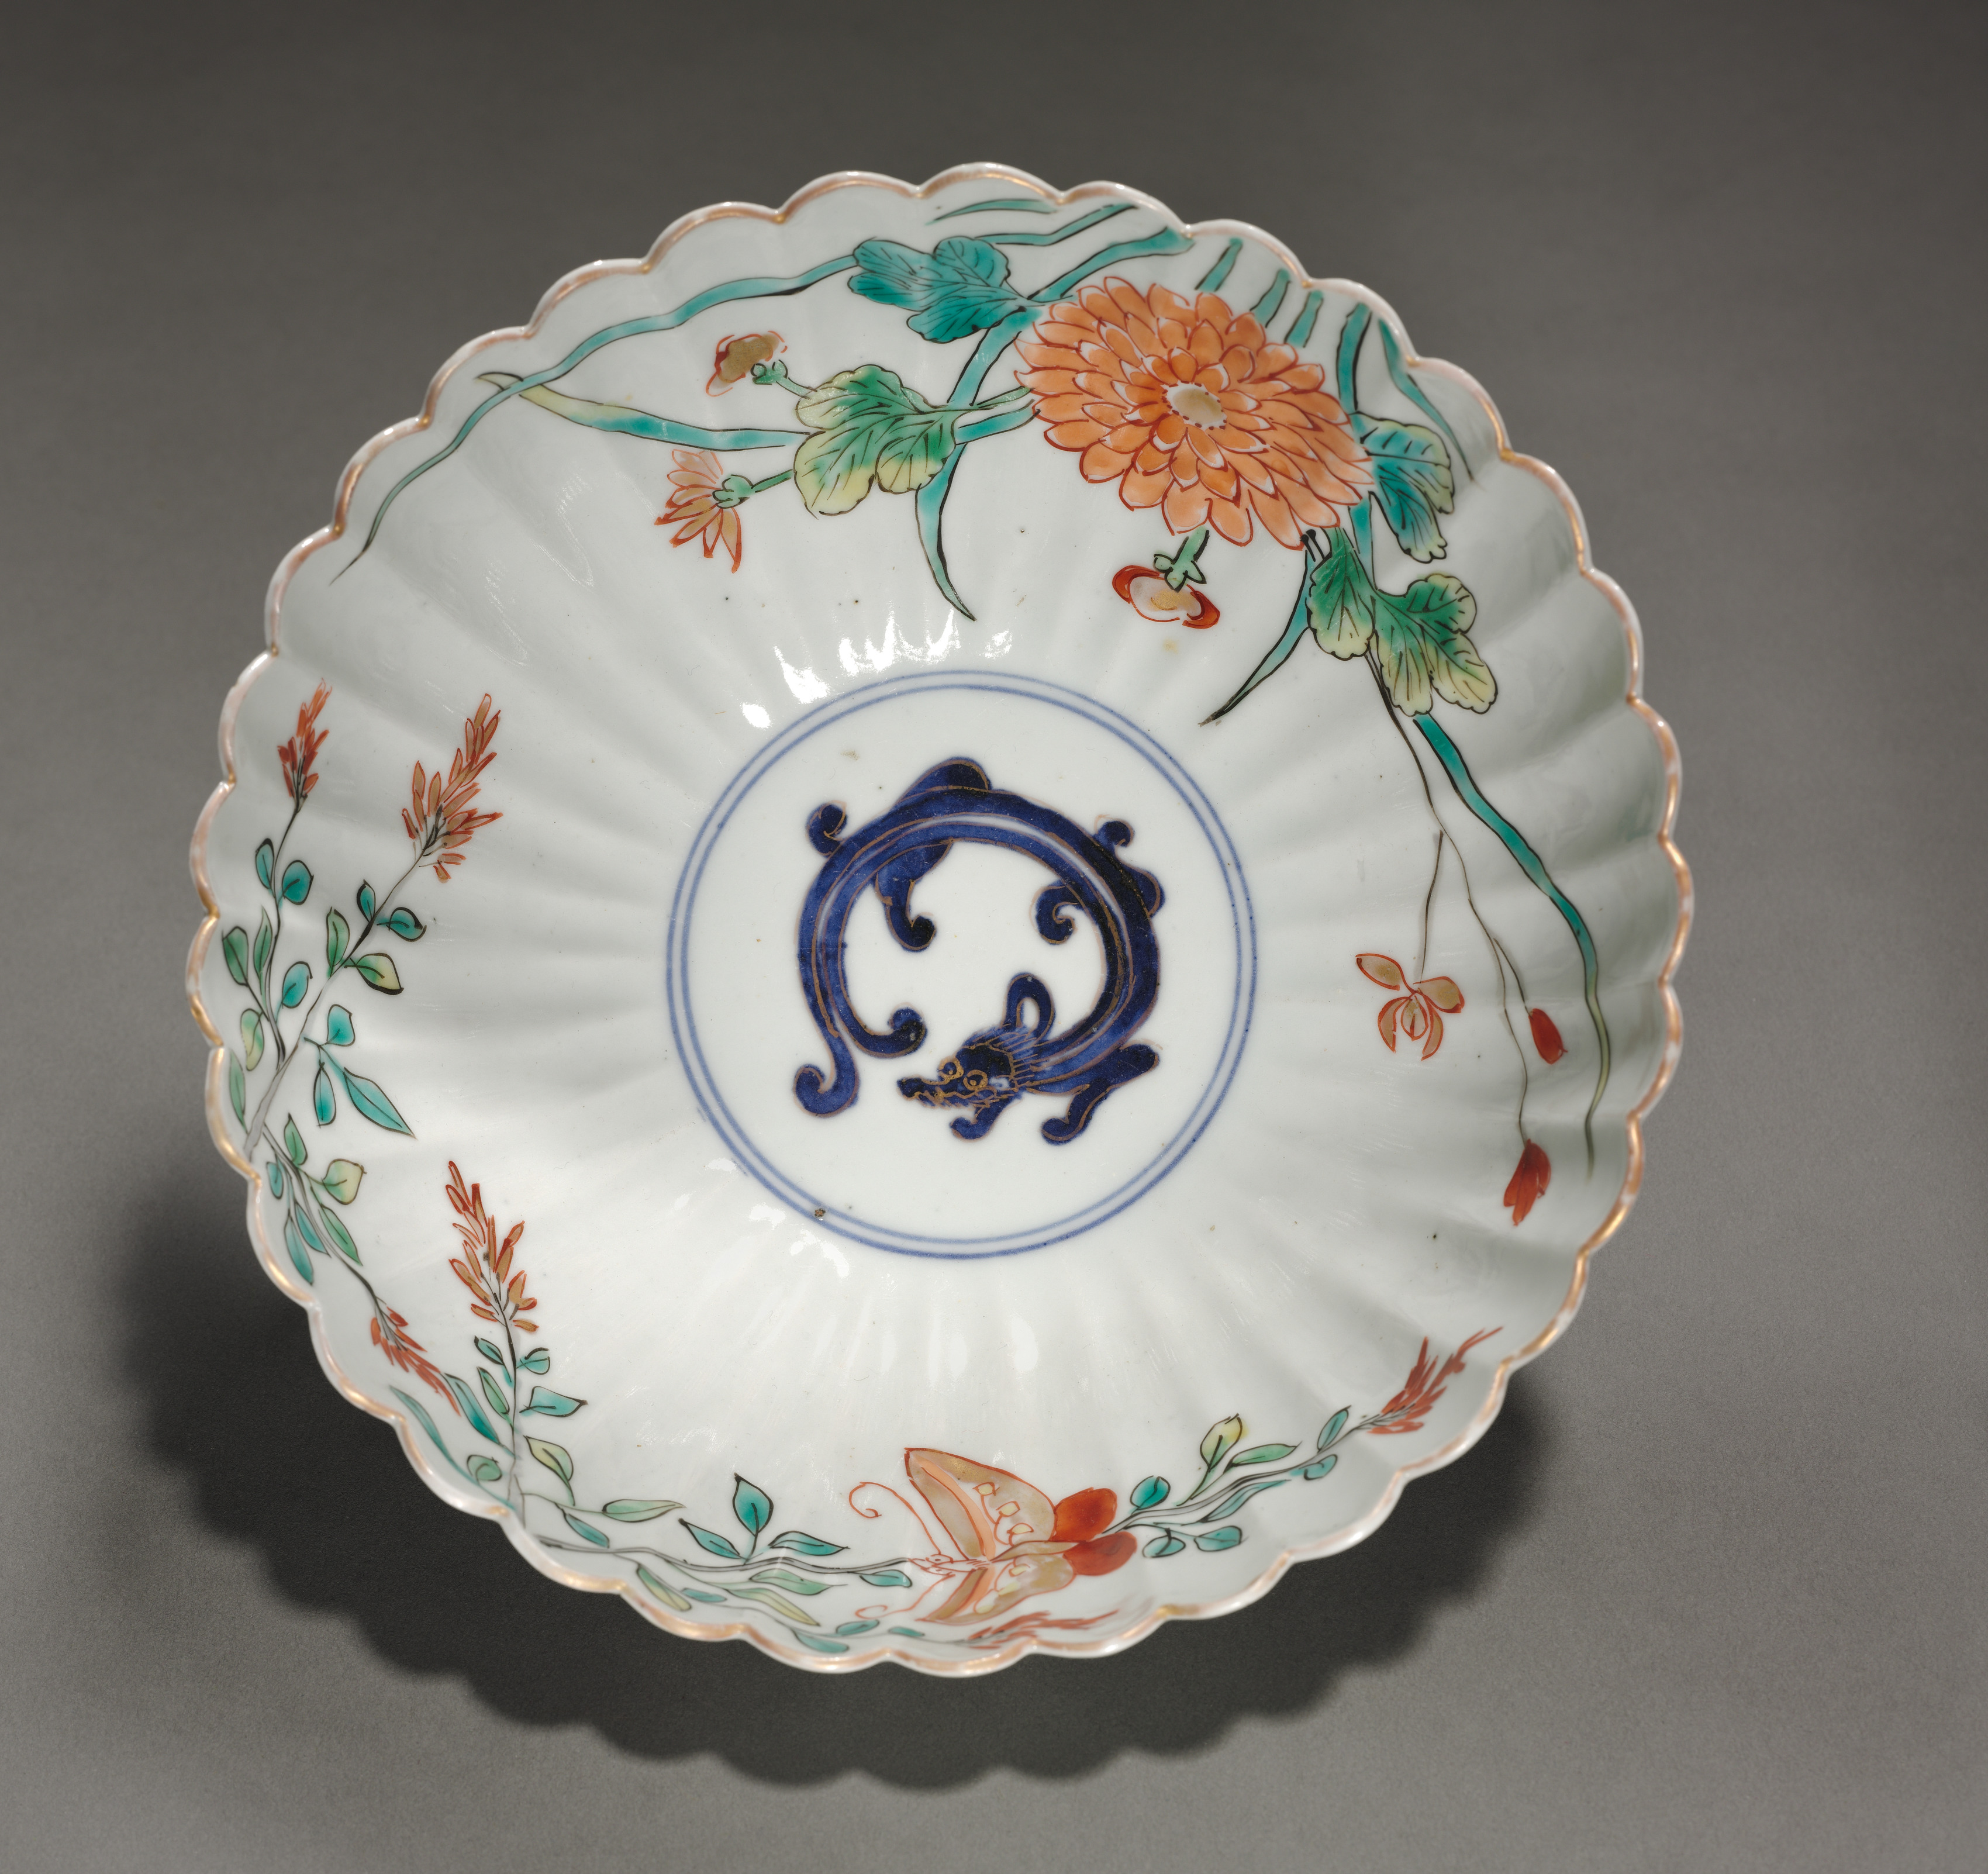 Fluted Bowl with Dragon, Butterfly, and Flowers